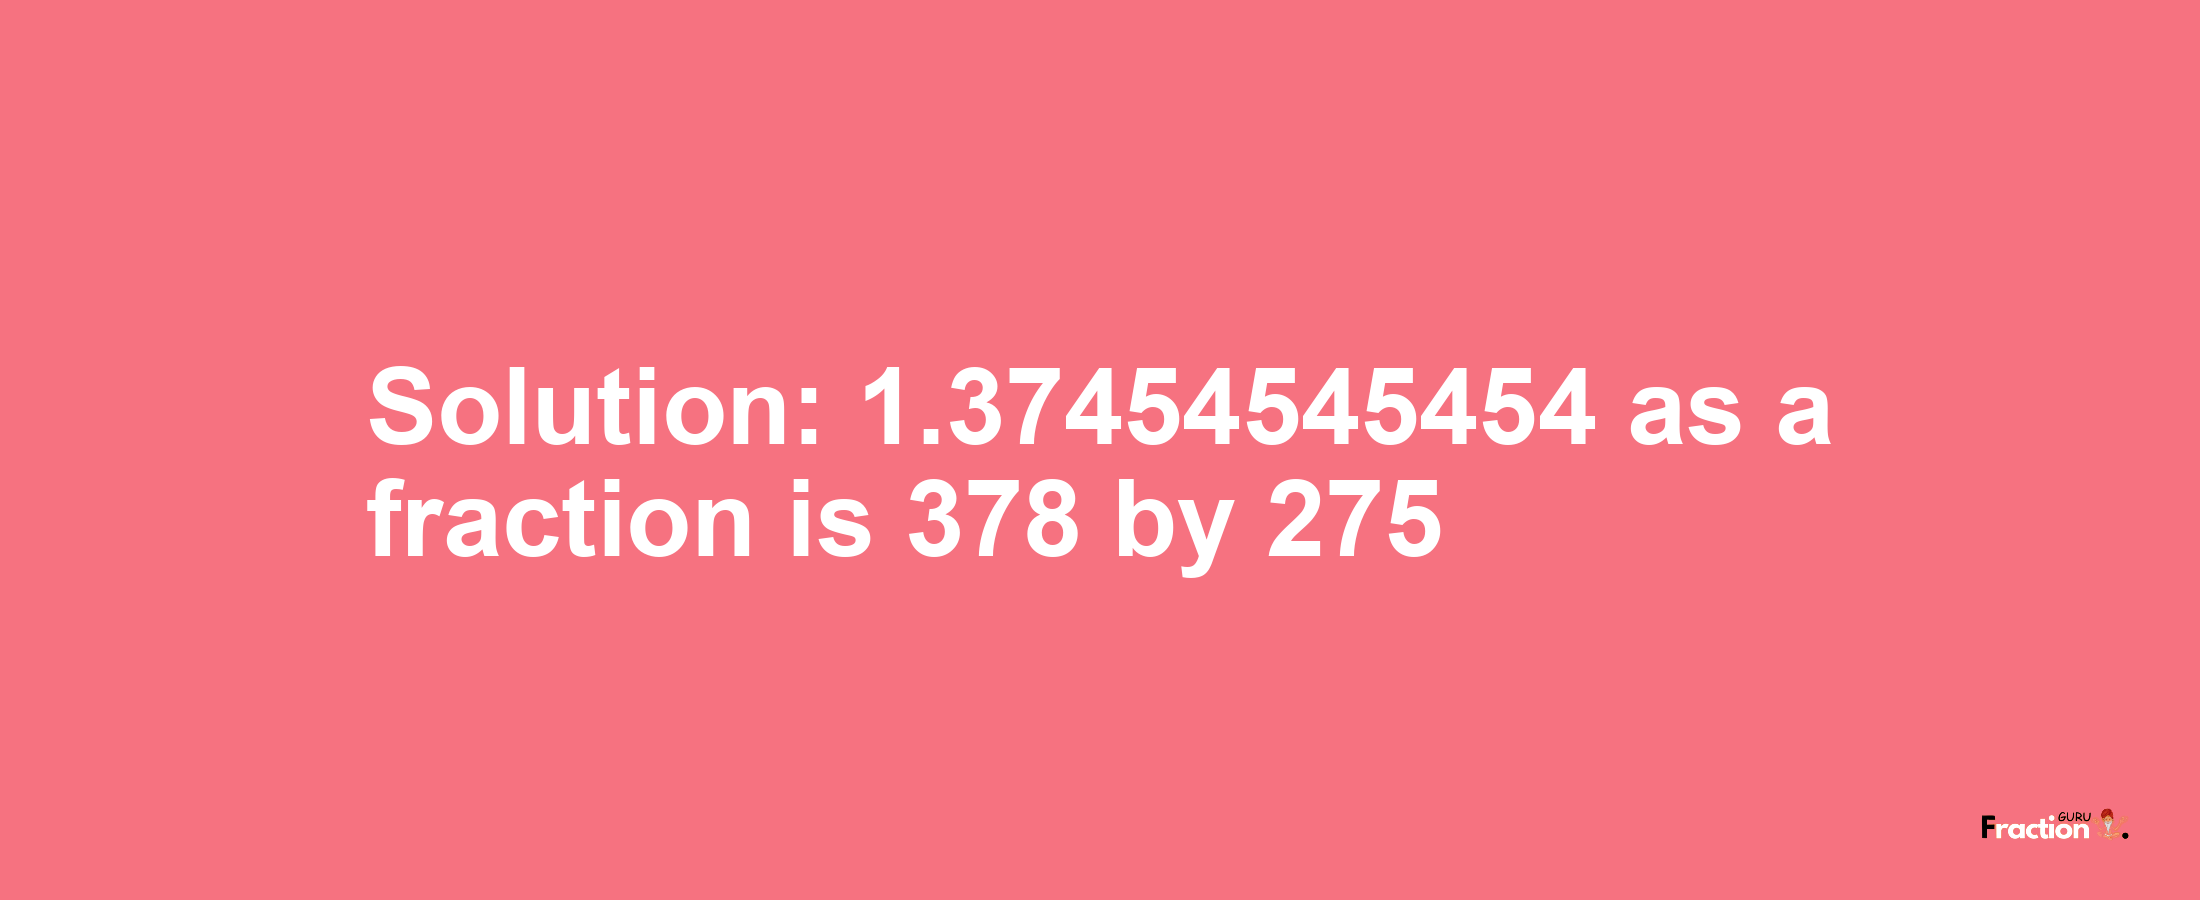 Solution:1.37454545454 as a fraction is 378/275